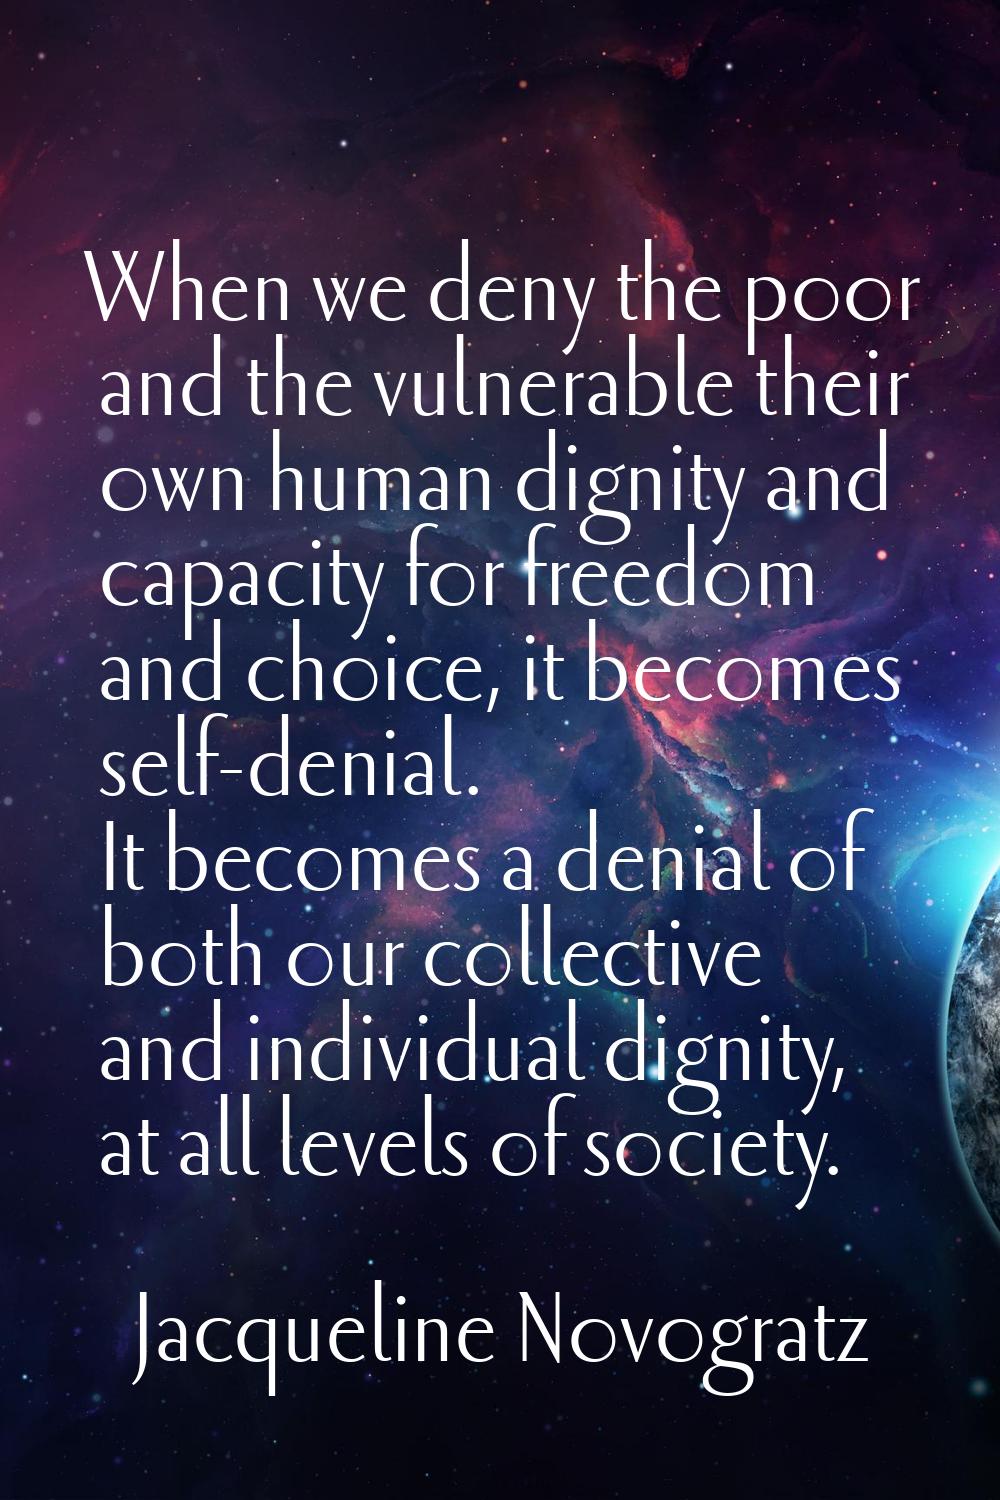 When we deny the poor and the vulnerable their own human dignity and capacity for freedom and choic